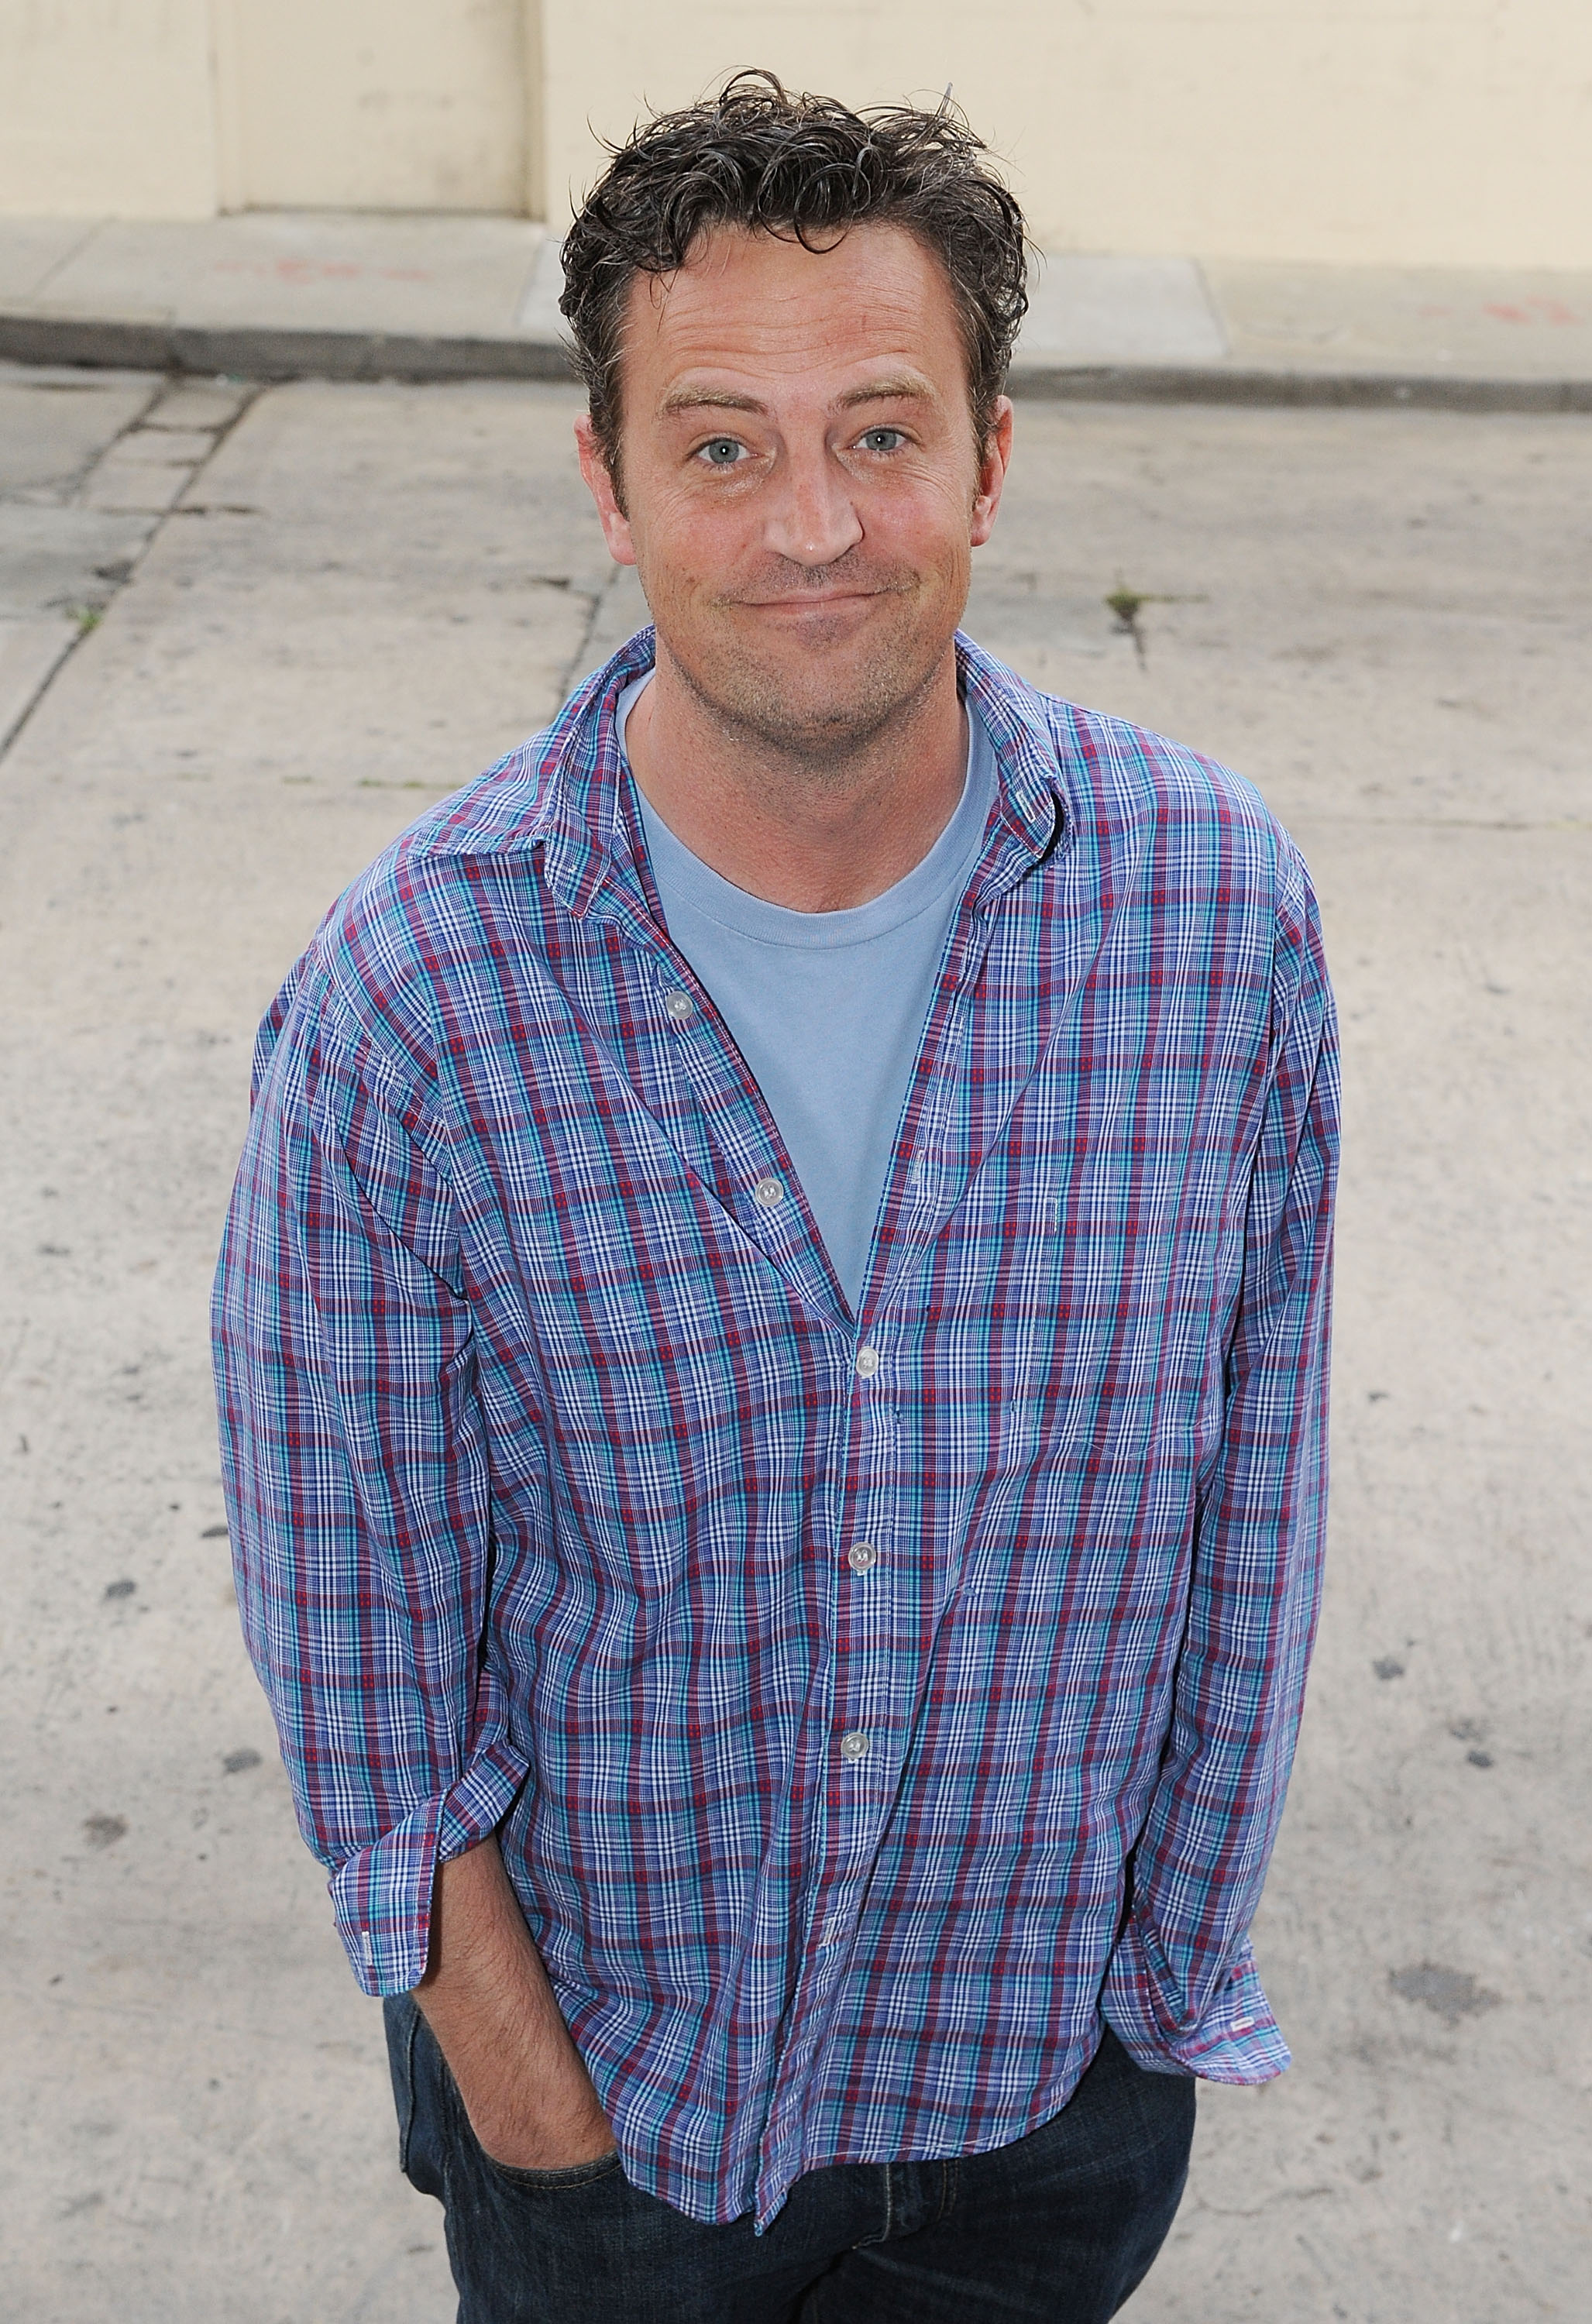 Matthew Perry at a taping of TheRoomlive.com's "Celebrity Liar" in Hollywood, California on June 29, 2010. | Source: Getty Images